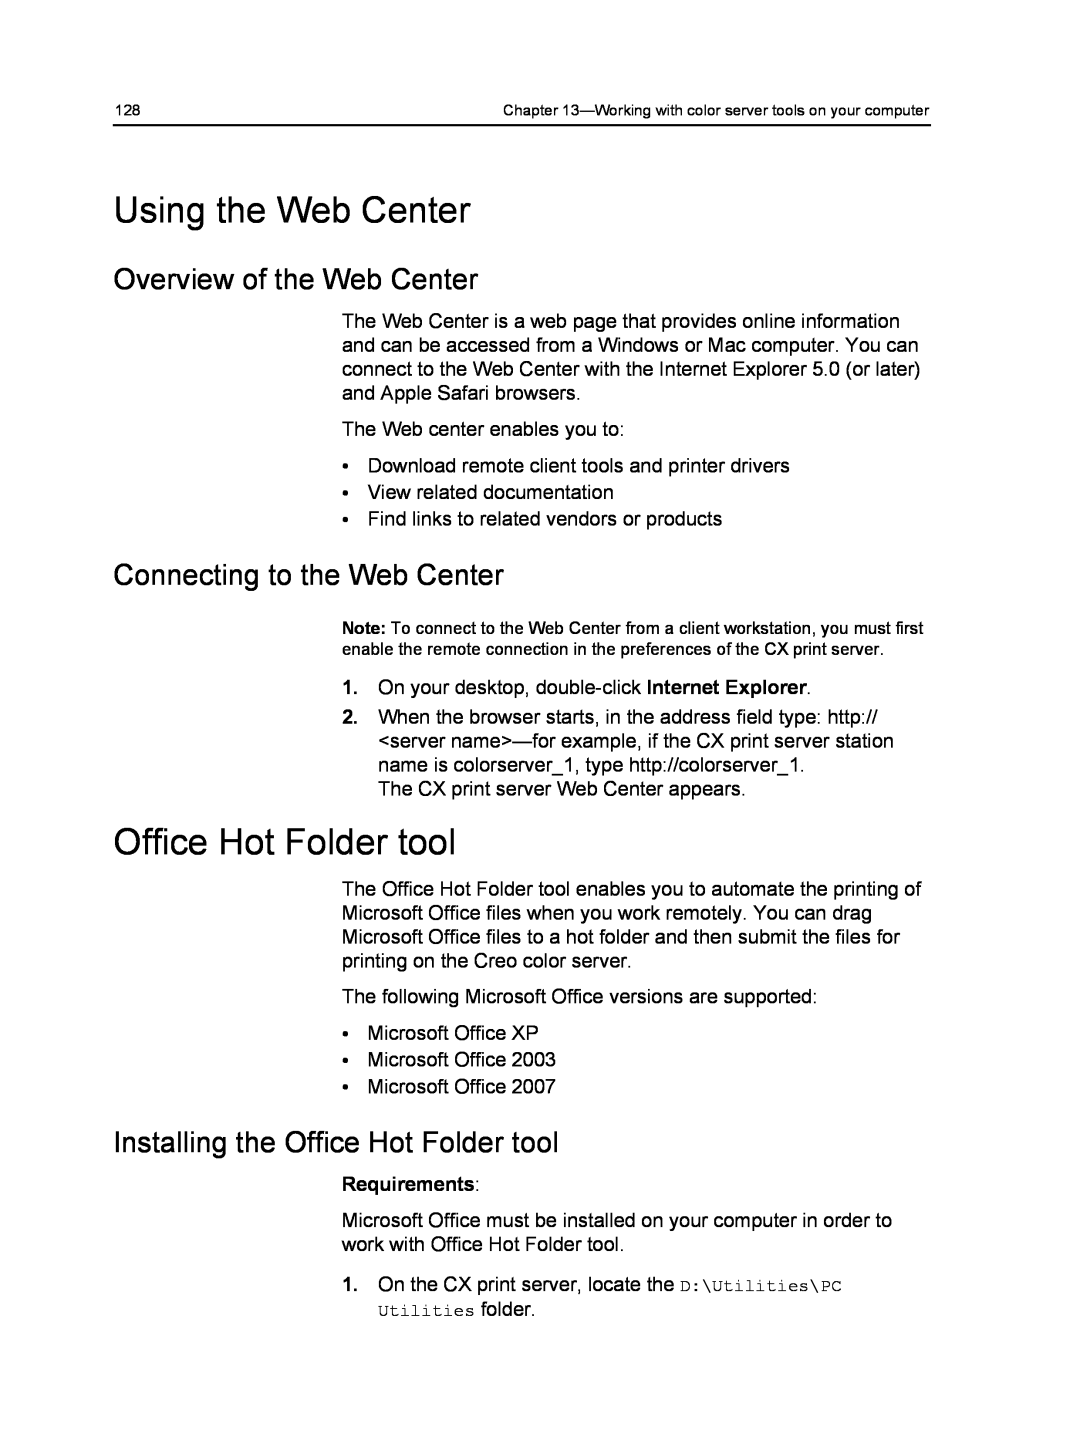 Xerox 560, 550 manual Using the Web Center, Office Hot Folder tool, Overview of the Web Center, Connecting to the Web Center 